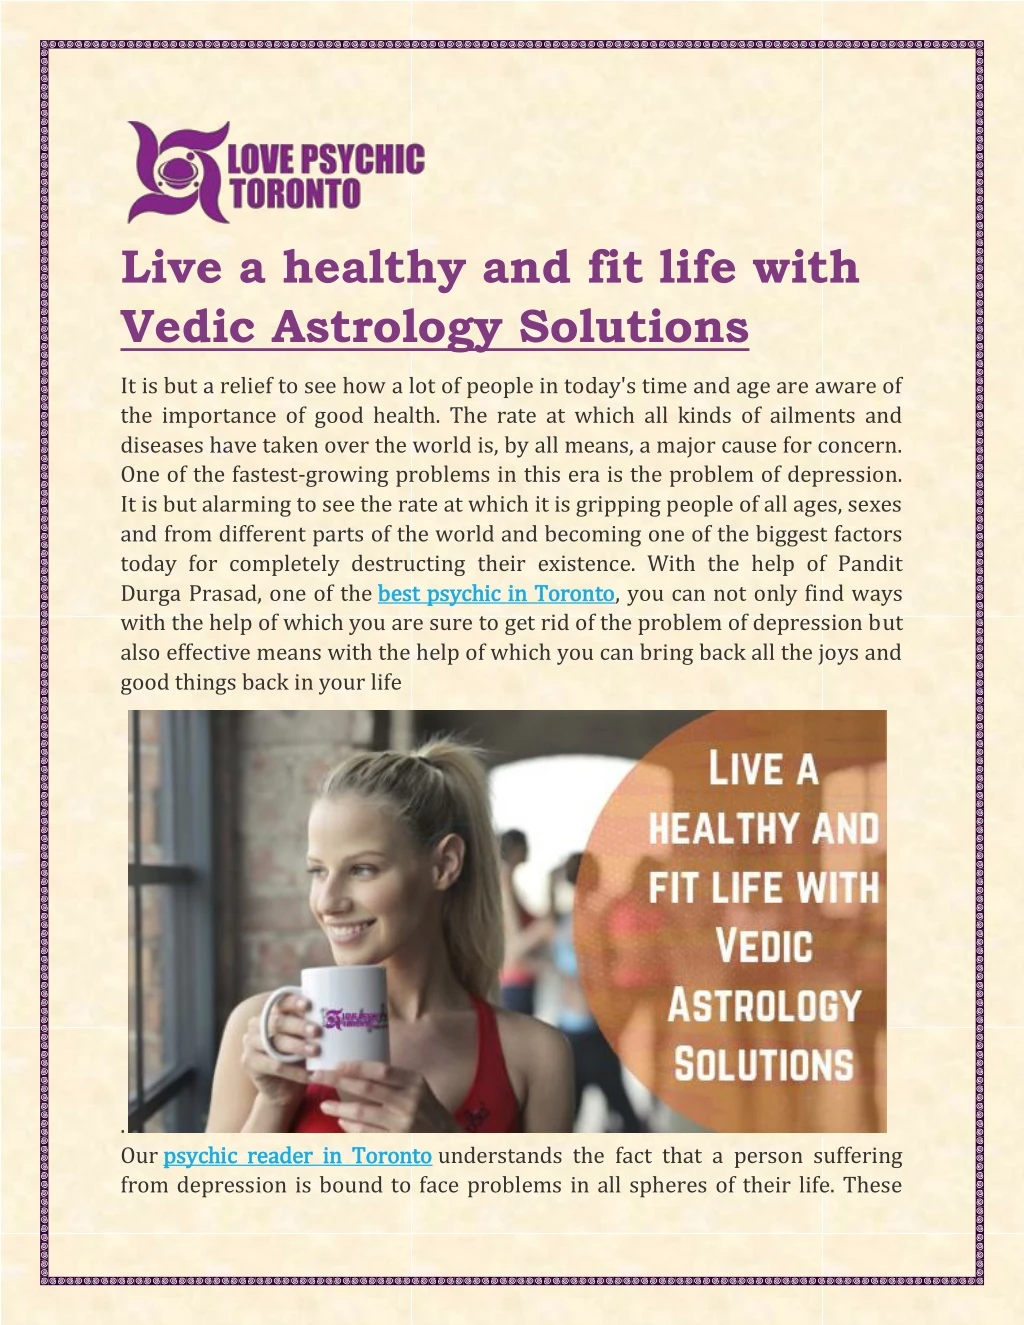 live a healthy and fit life with vedic astrology